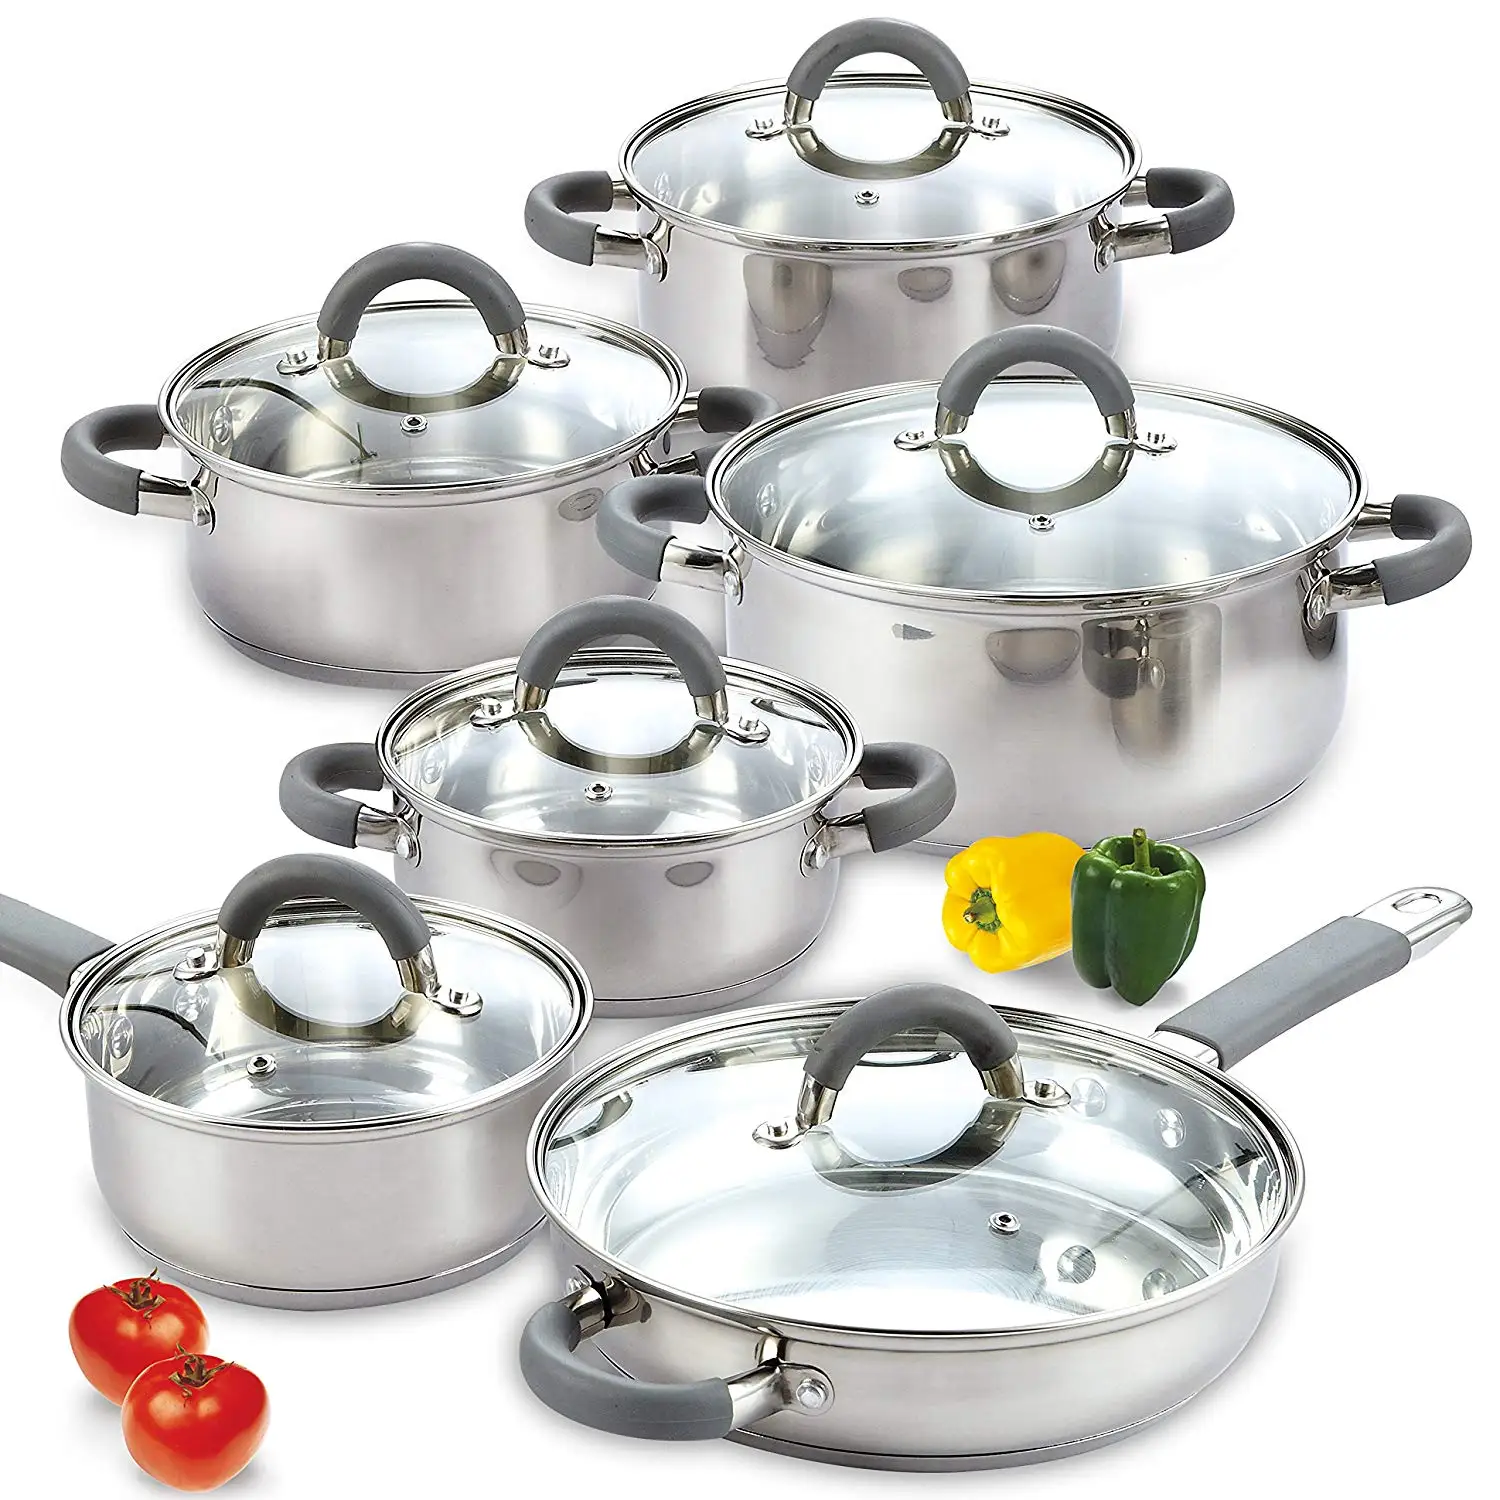 304-stainless-steel-12-piece-cookware-set-with-three-layers-composite